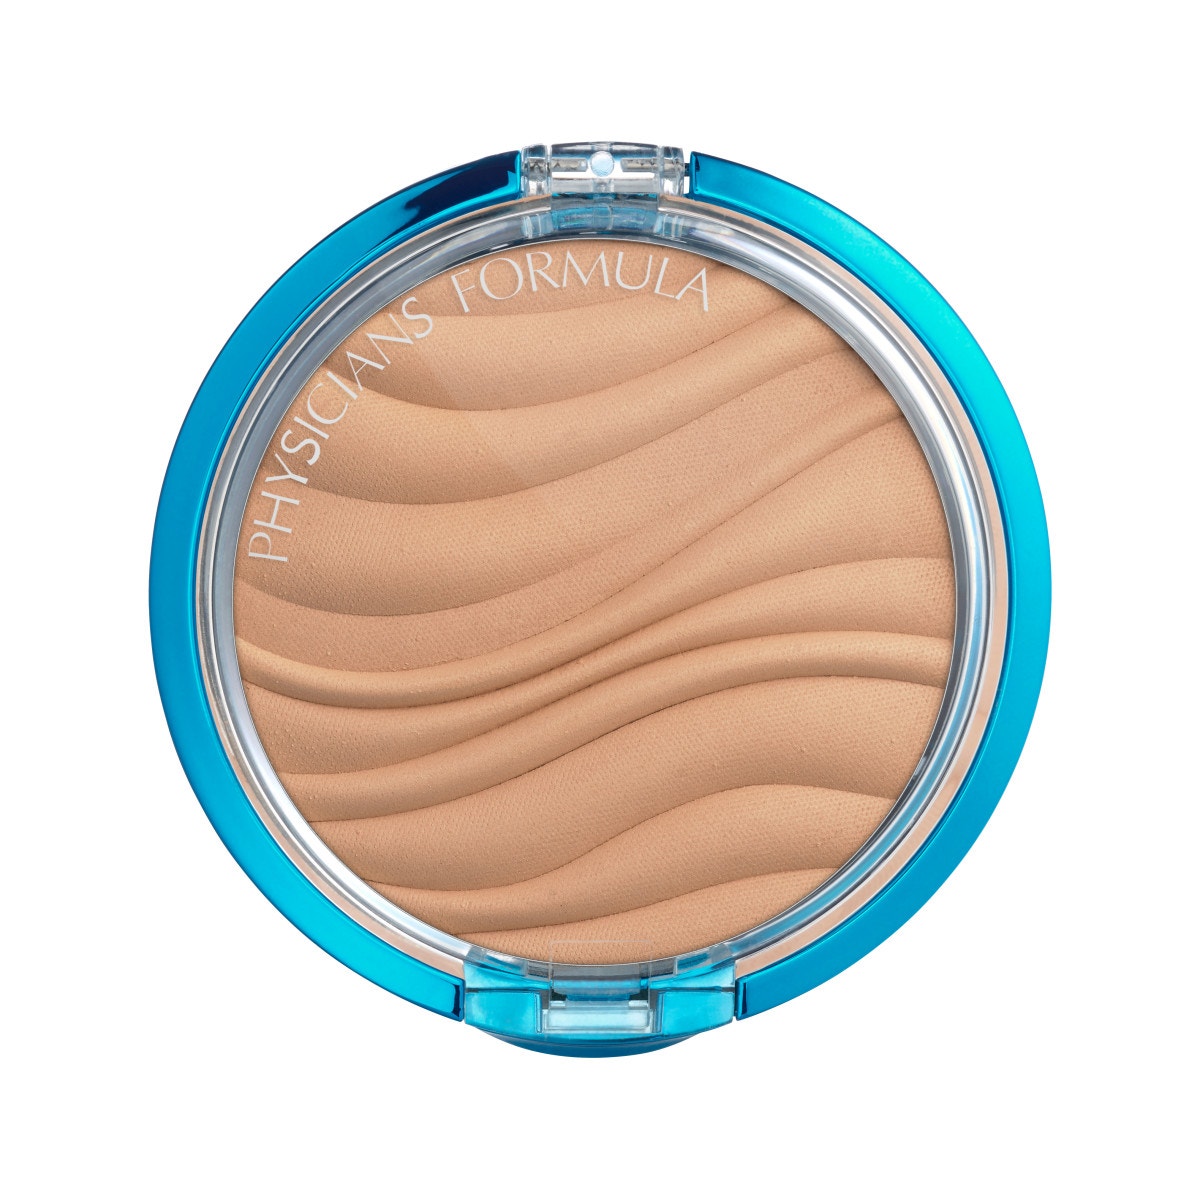 - Talc-Free Mineral Mineral Powder | Beige Formula Wear® Airbrushing Physicians Pressed